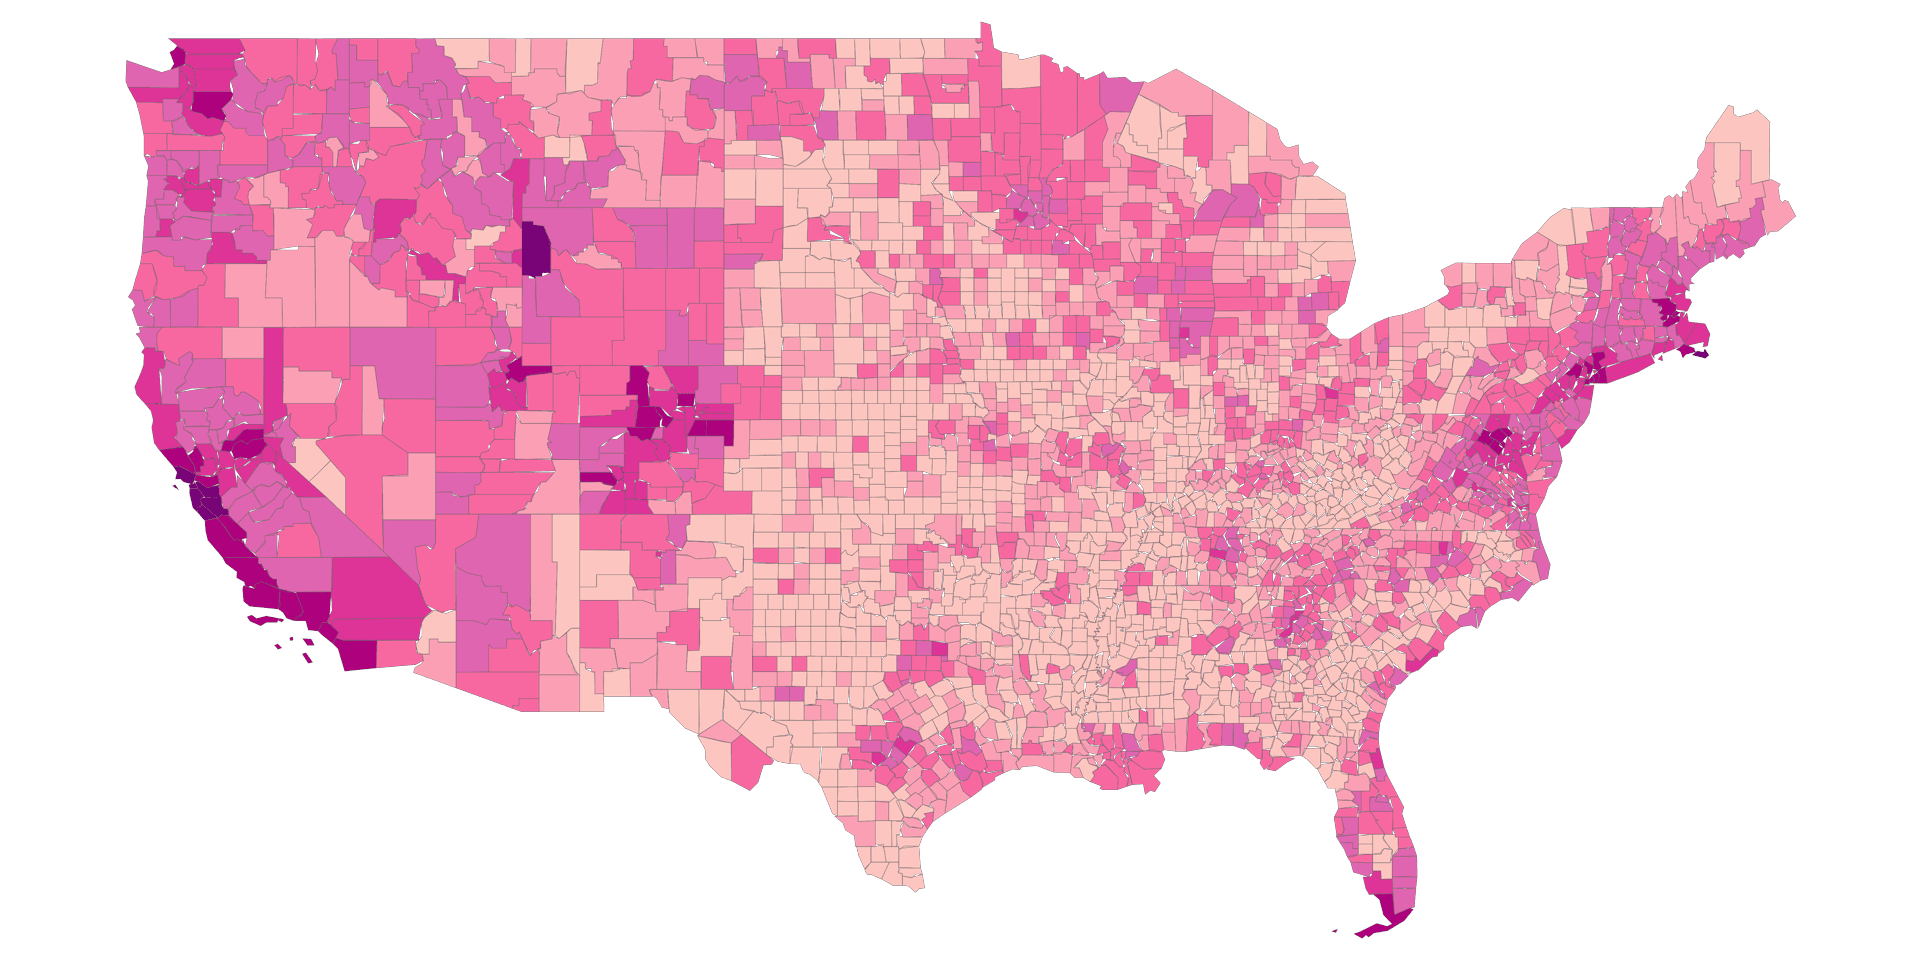 United States Median Household Value by County